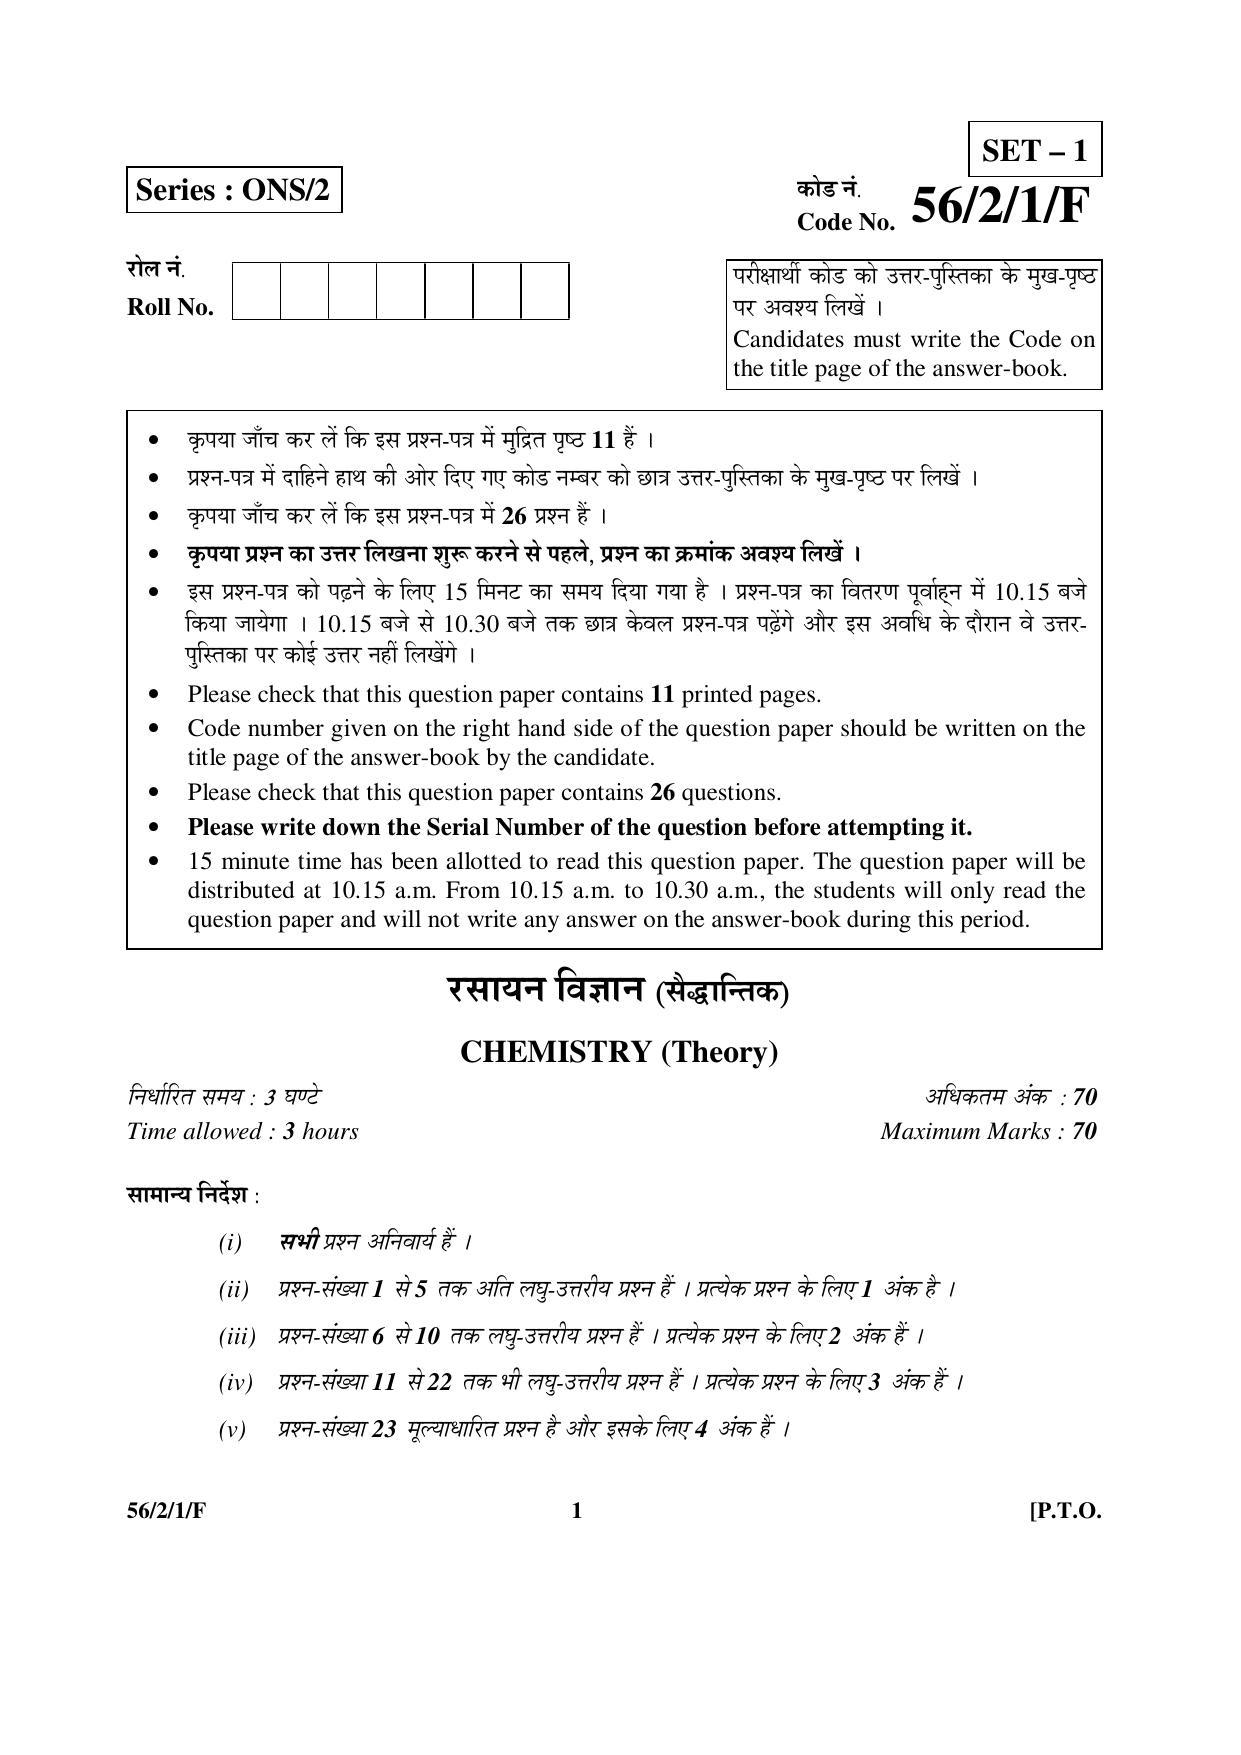 CBSE Class 12 56-2-1-F _Chemistry_ 2016 Question Paper - Page 1